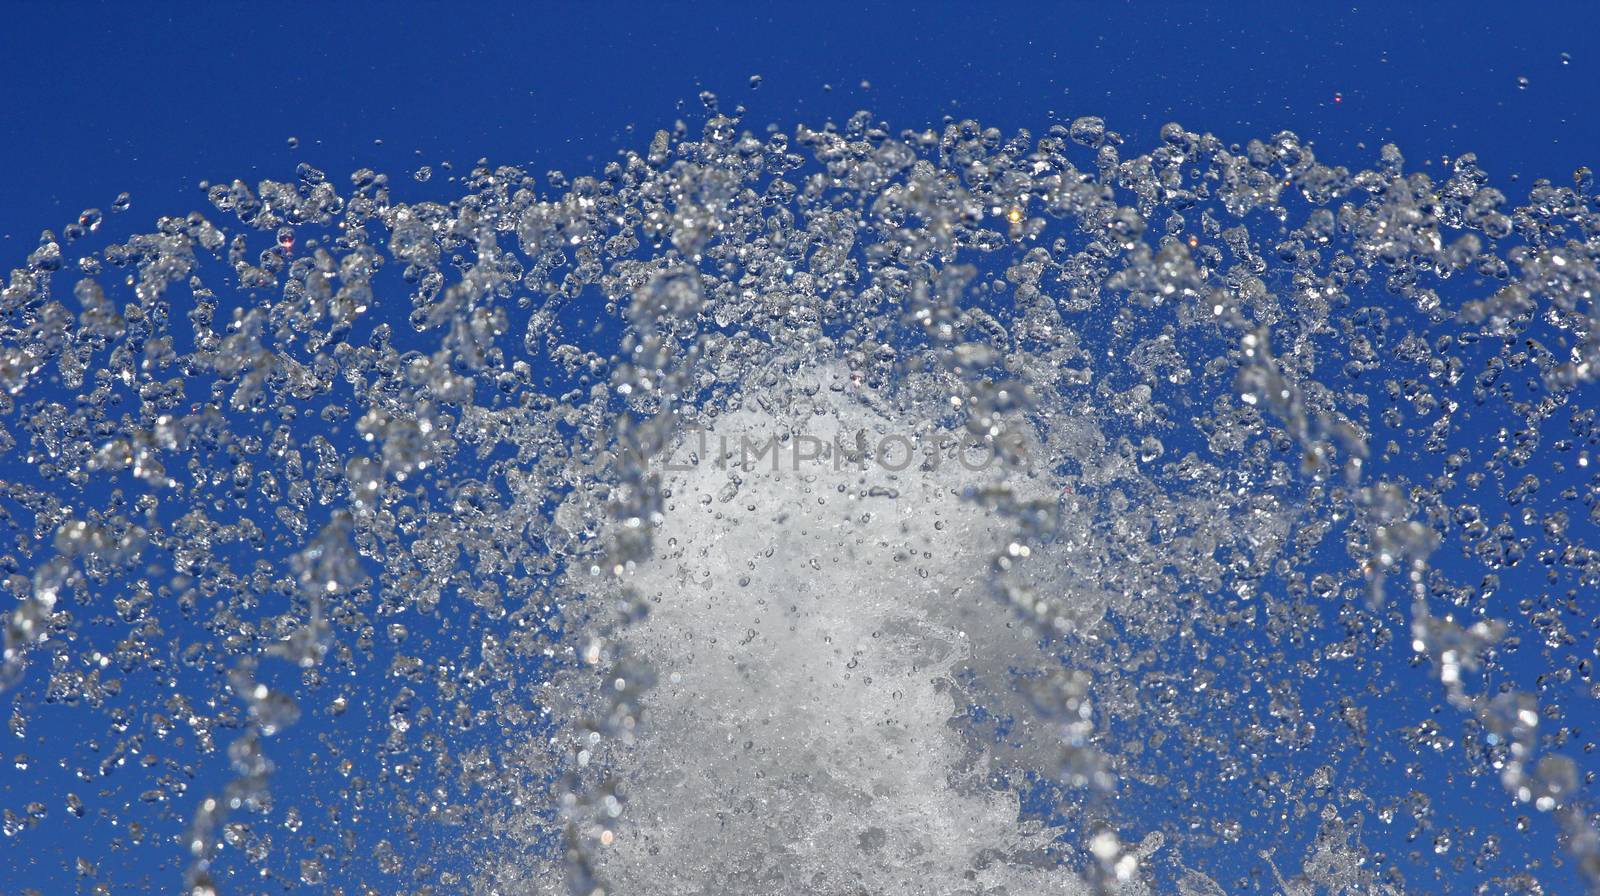 Fountain drops of pure water against a blue sky.